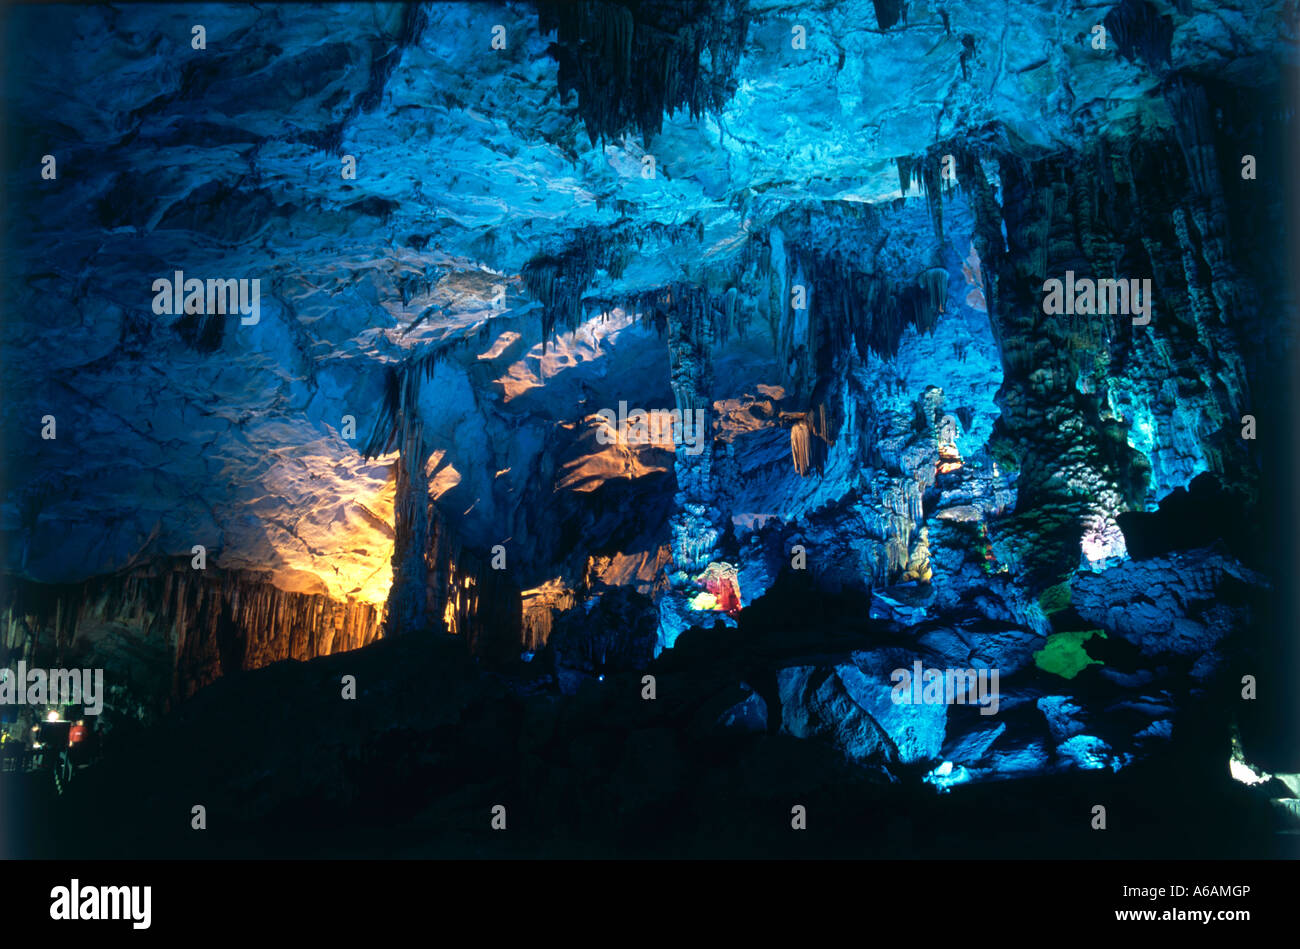 China, Guangxi, Guilin, Guangming Hill, Ludi Yan (Red Flute Cave), colorfully illuminated hall in cave limestone formations Stock Photo